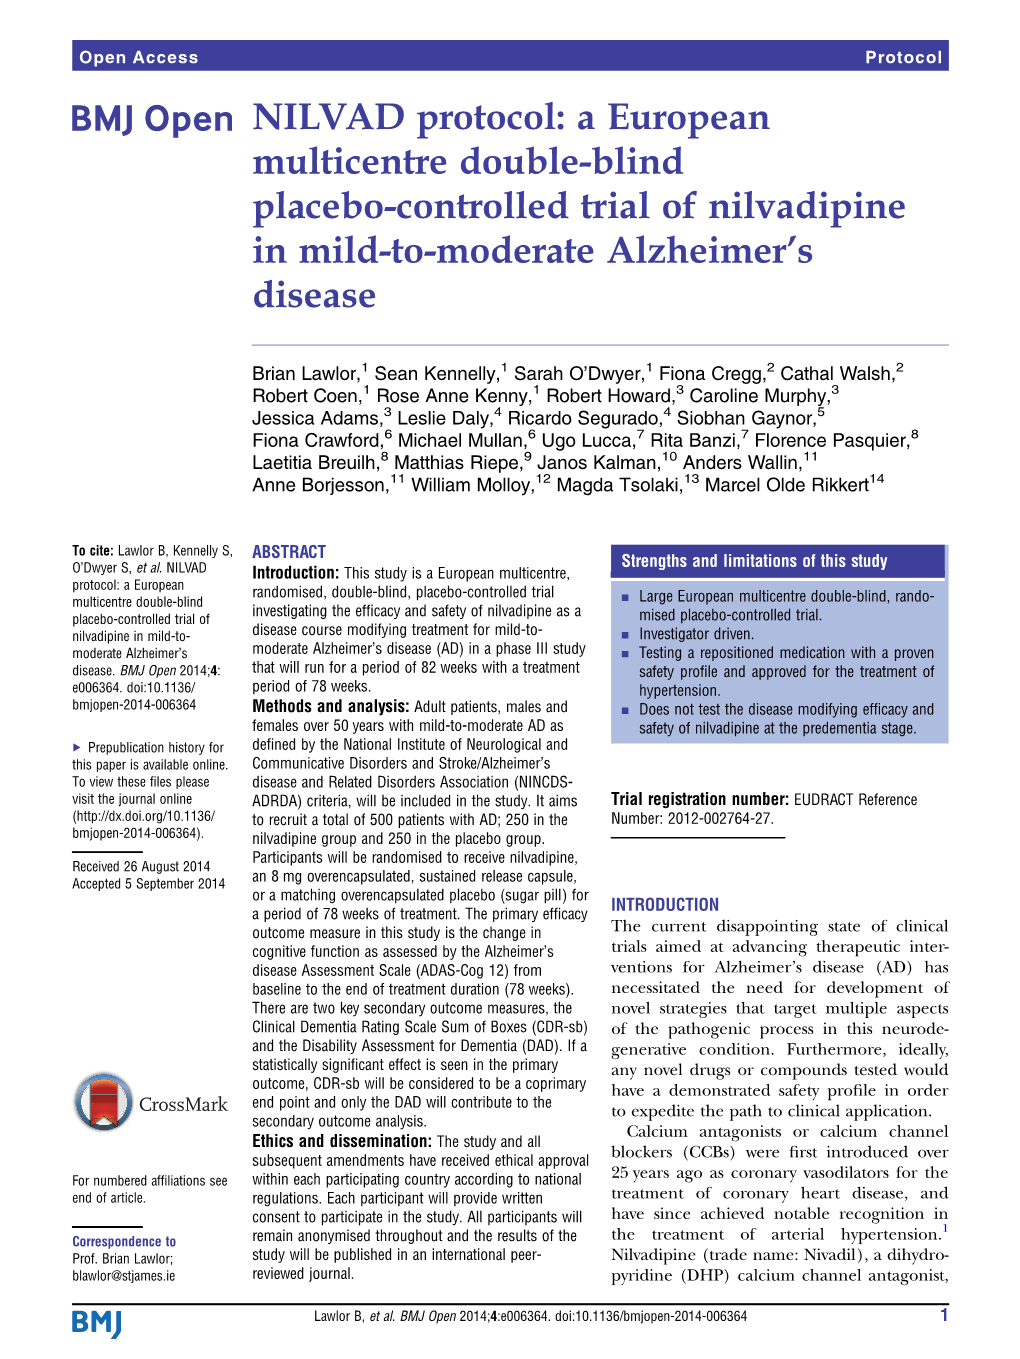 NILVAD Protocol: a European Multicentre Double-Blind Placebo-Controlled Trial of Nilvadipine in Mild-To-Moderate Alzheimer’S Disease